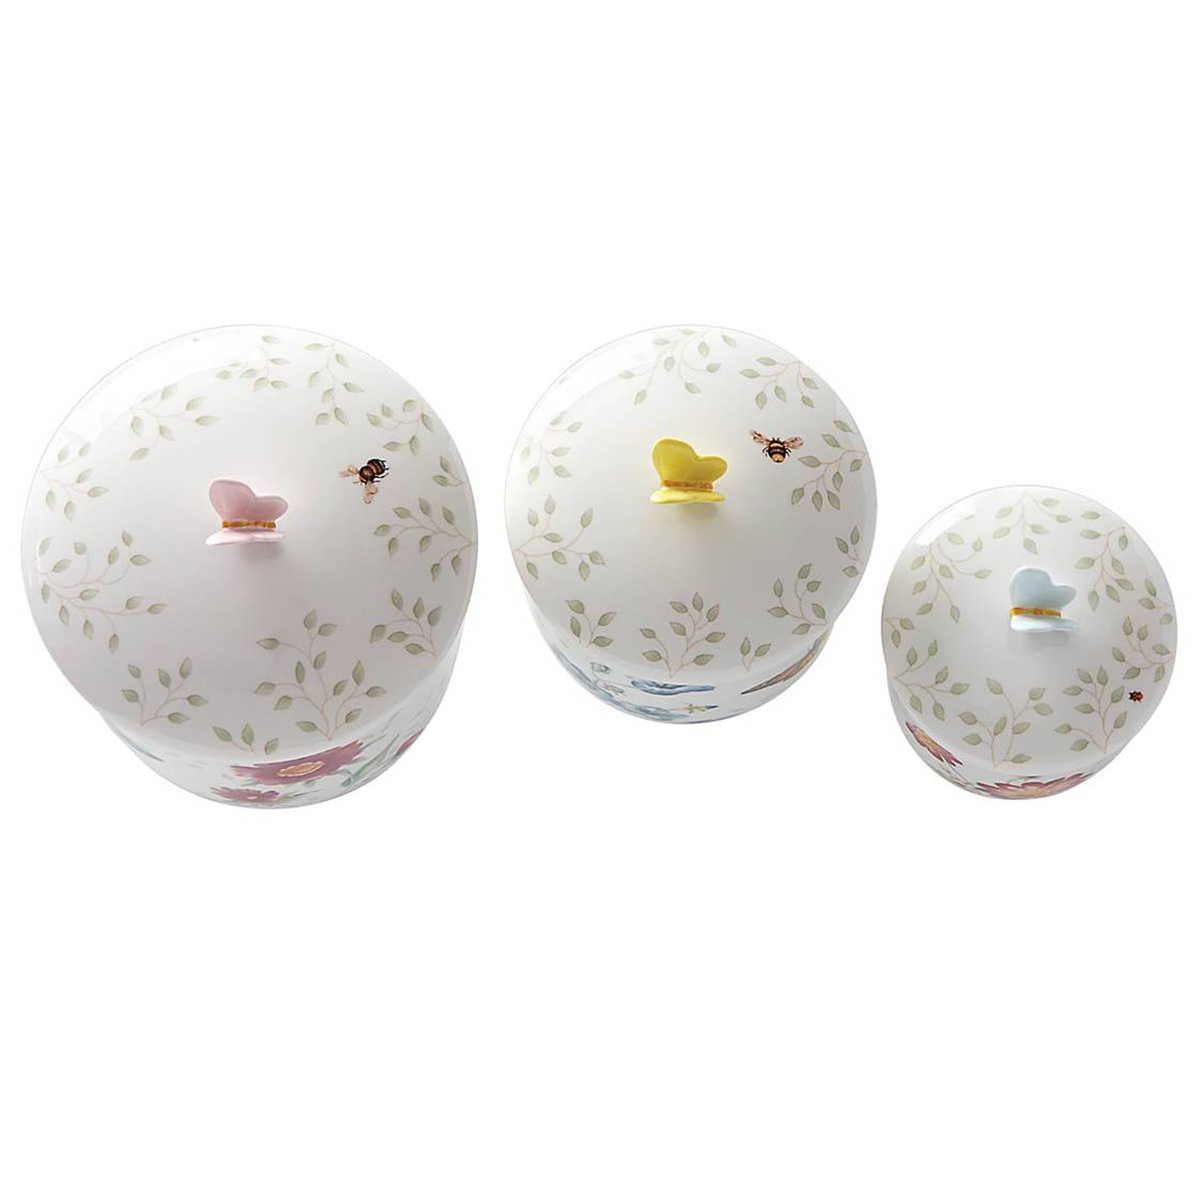 Lenox(R) Butterfly Meadow(R) 3pc. Canister Set